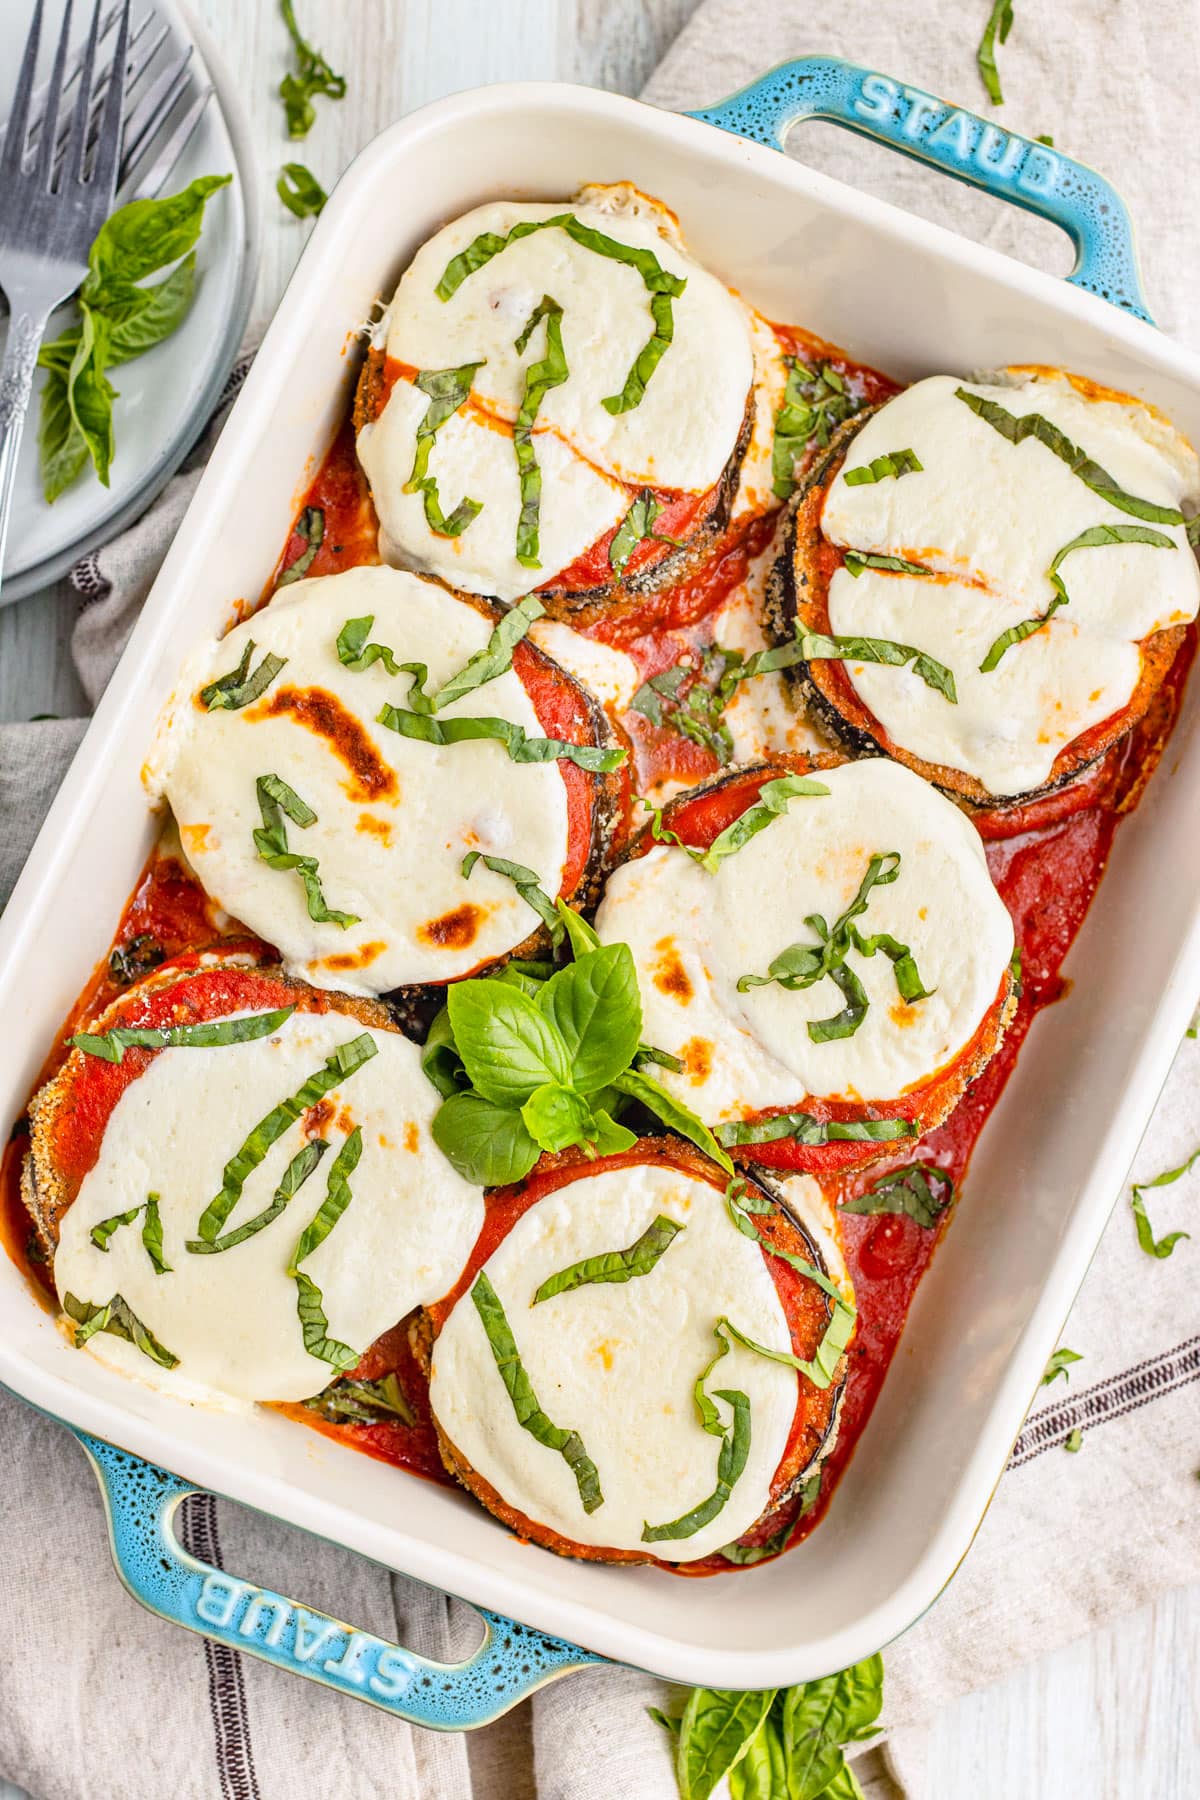 Keto eggplant parmesan in a deep baking dish with turquoise handles.